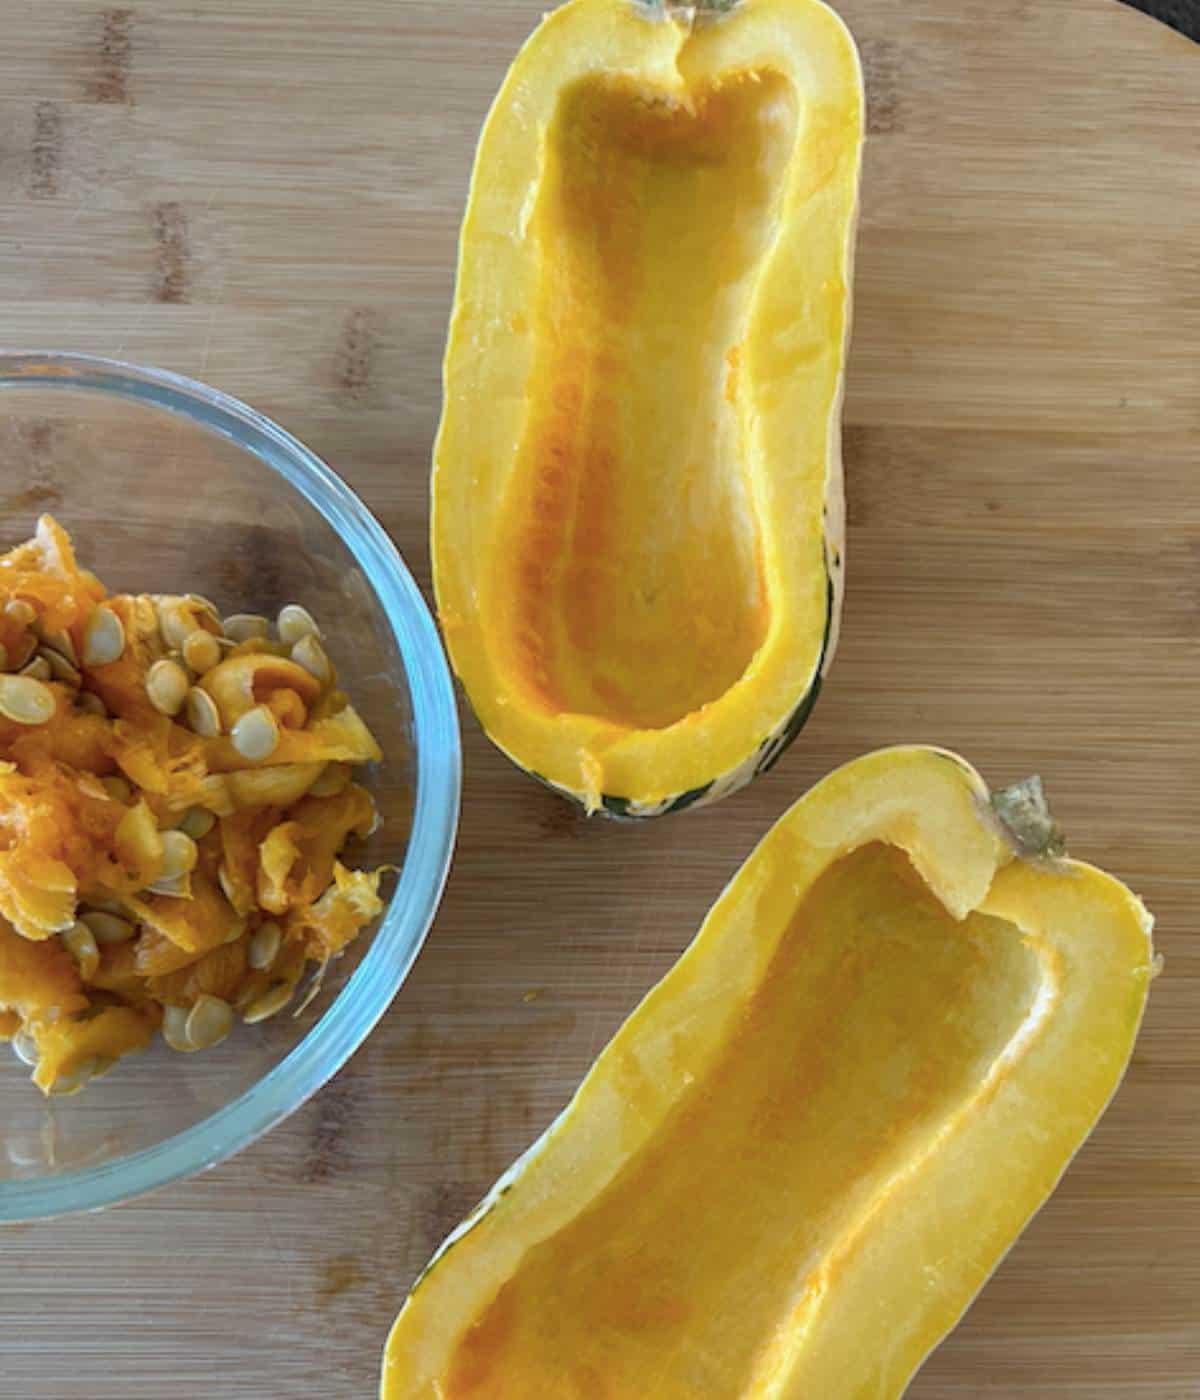 Delicata squash cut in half with seeds removed.